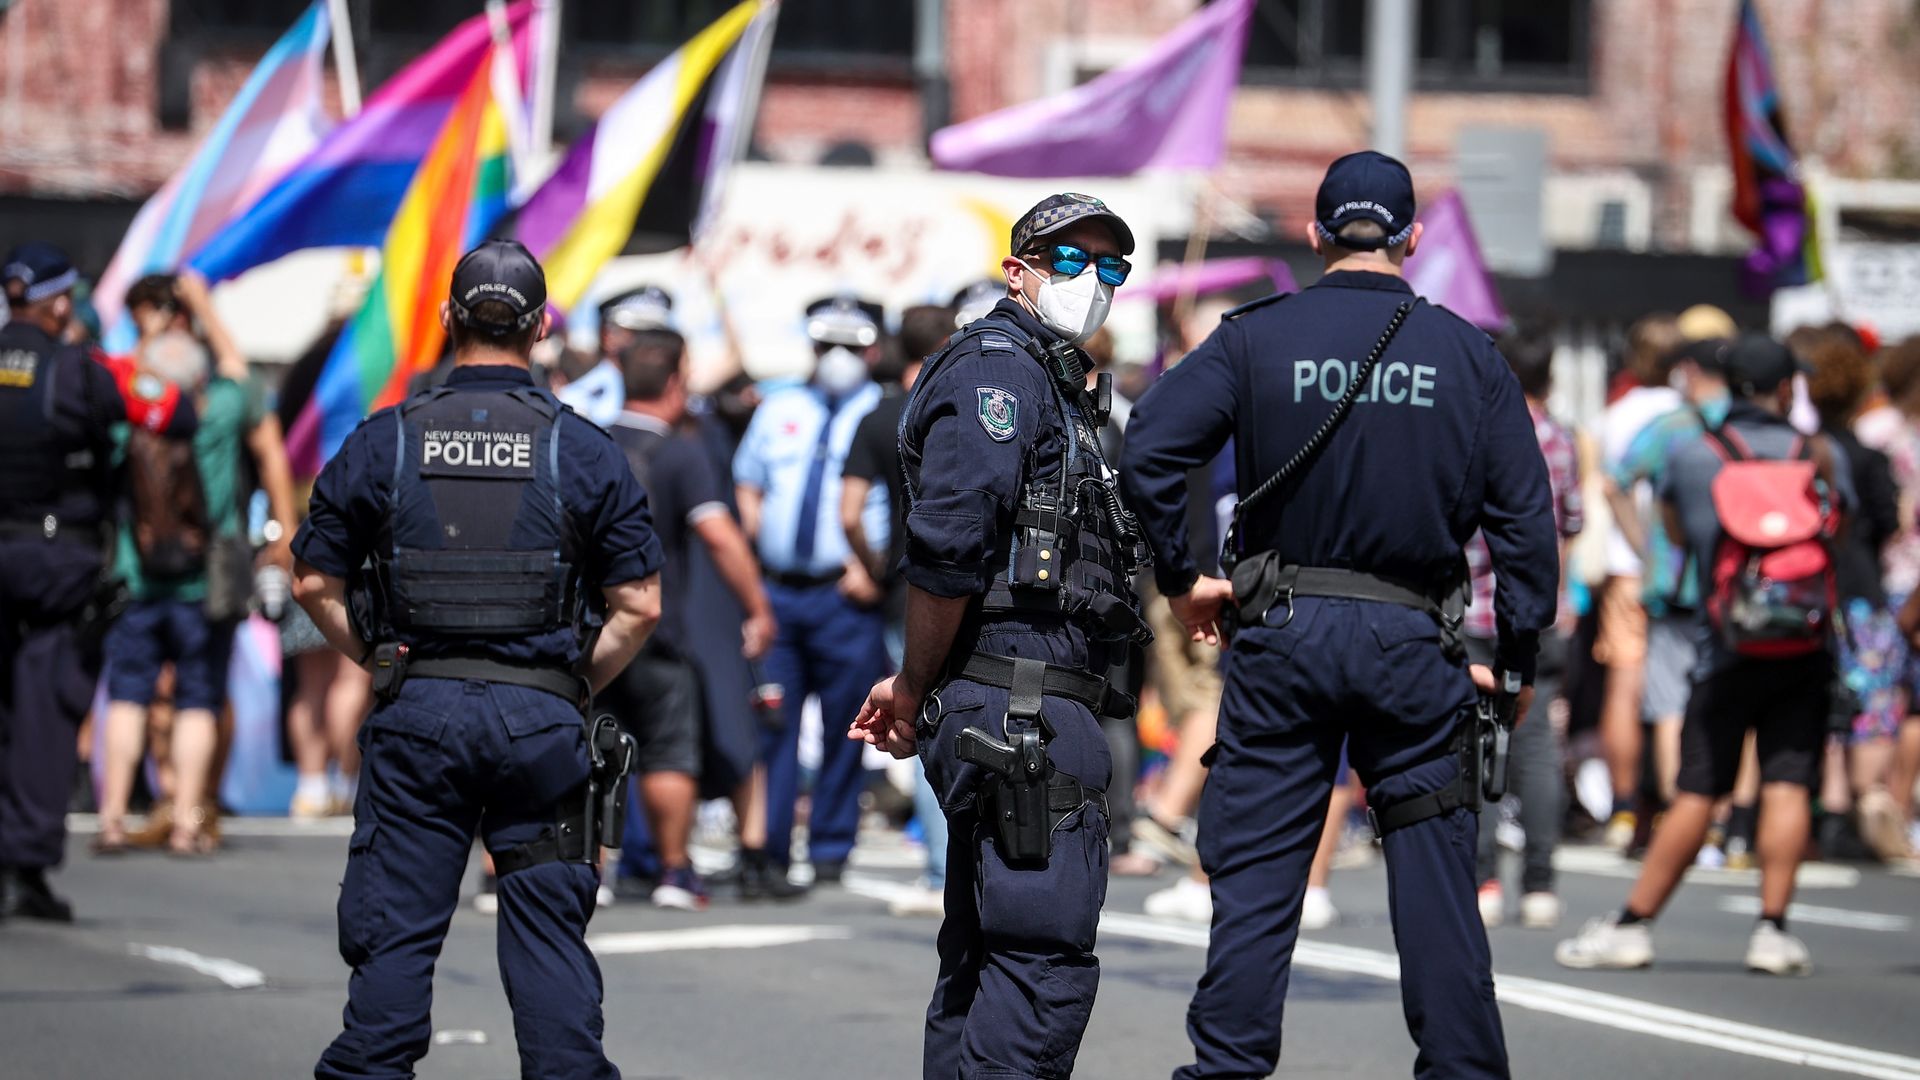 Police standing in front of LGBTQ flags.